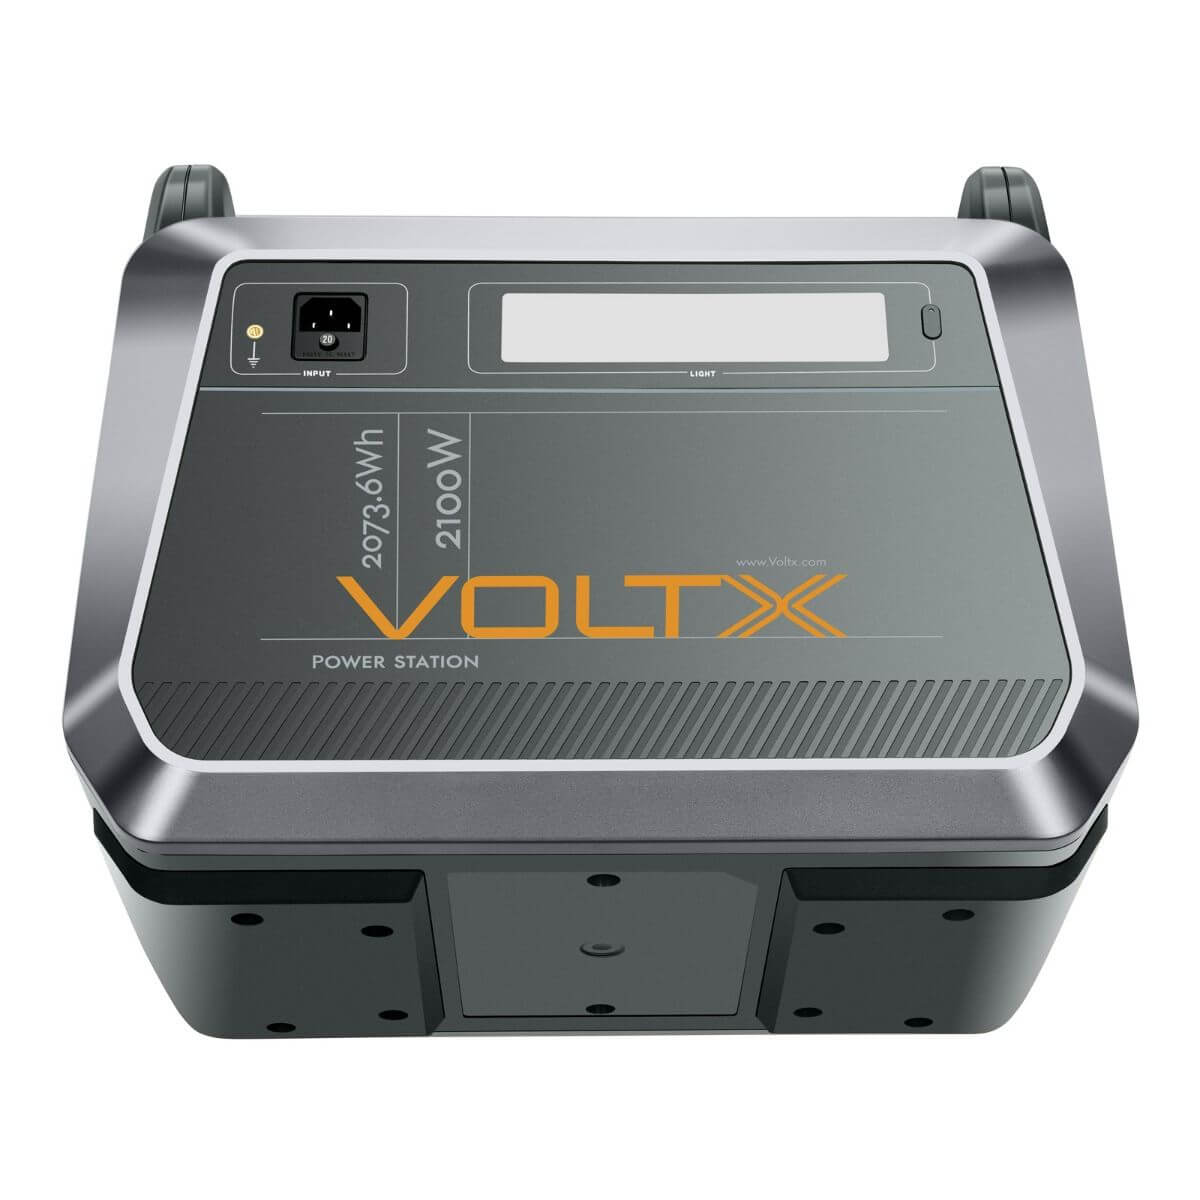 VOLTX 2100W PORTABLE POWER STATION 2073WH BACKUP FAST CHARGE